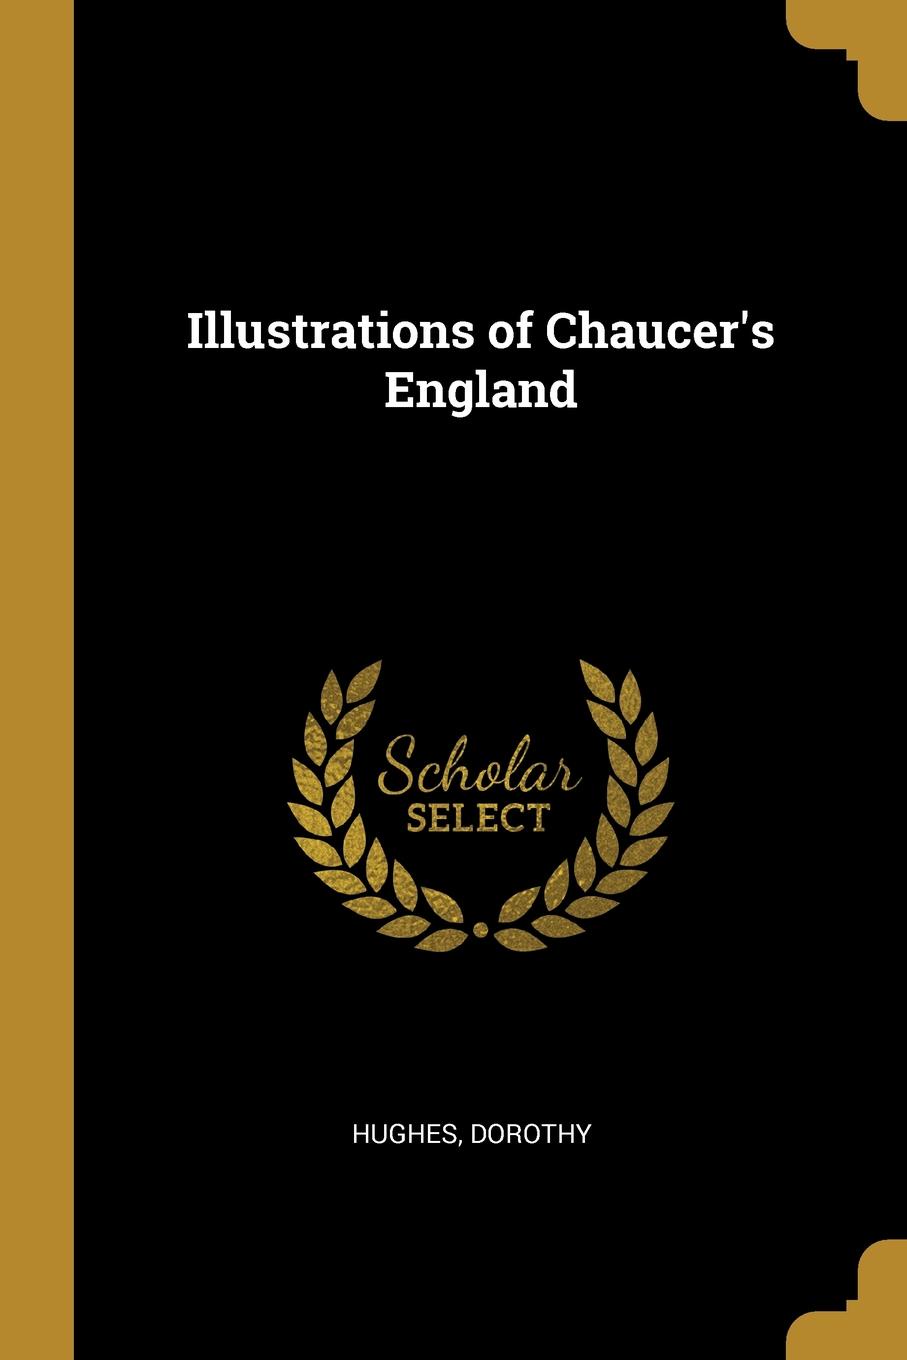 Illustrations of Chaucer.s England